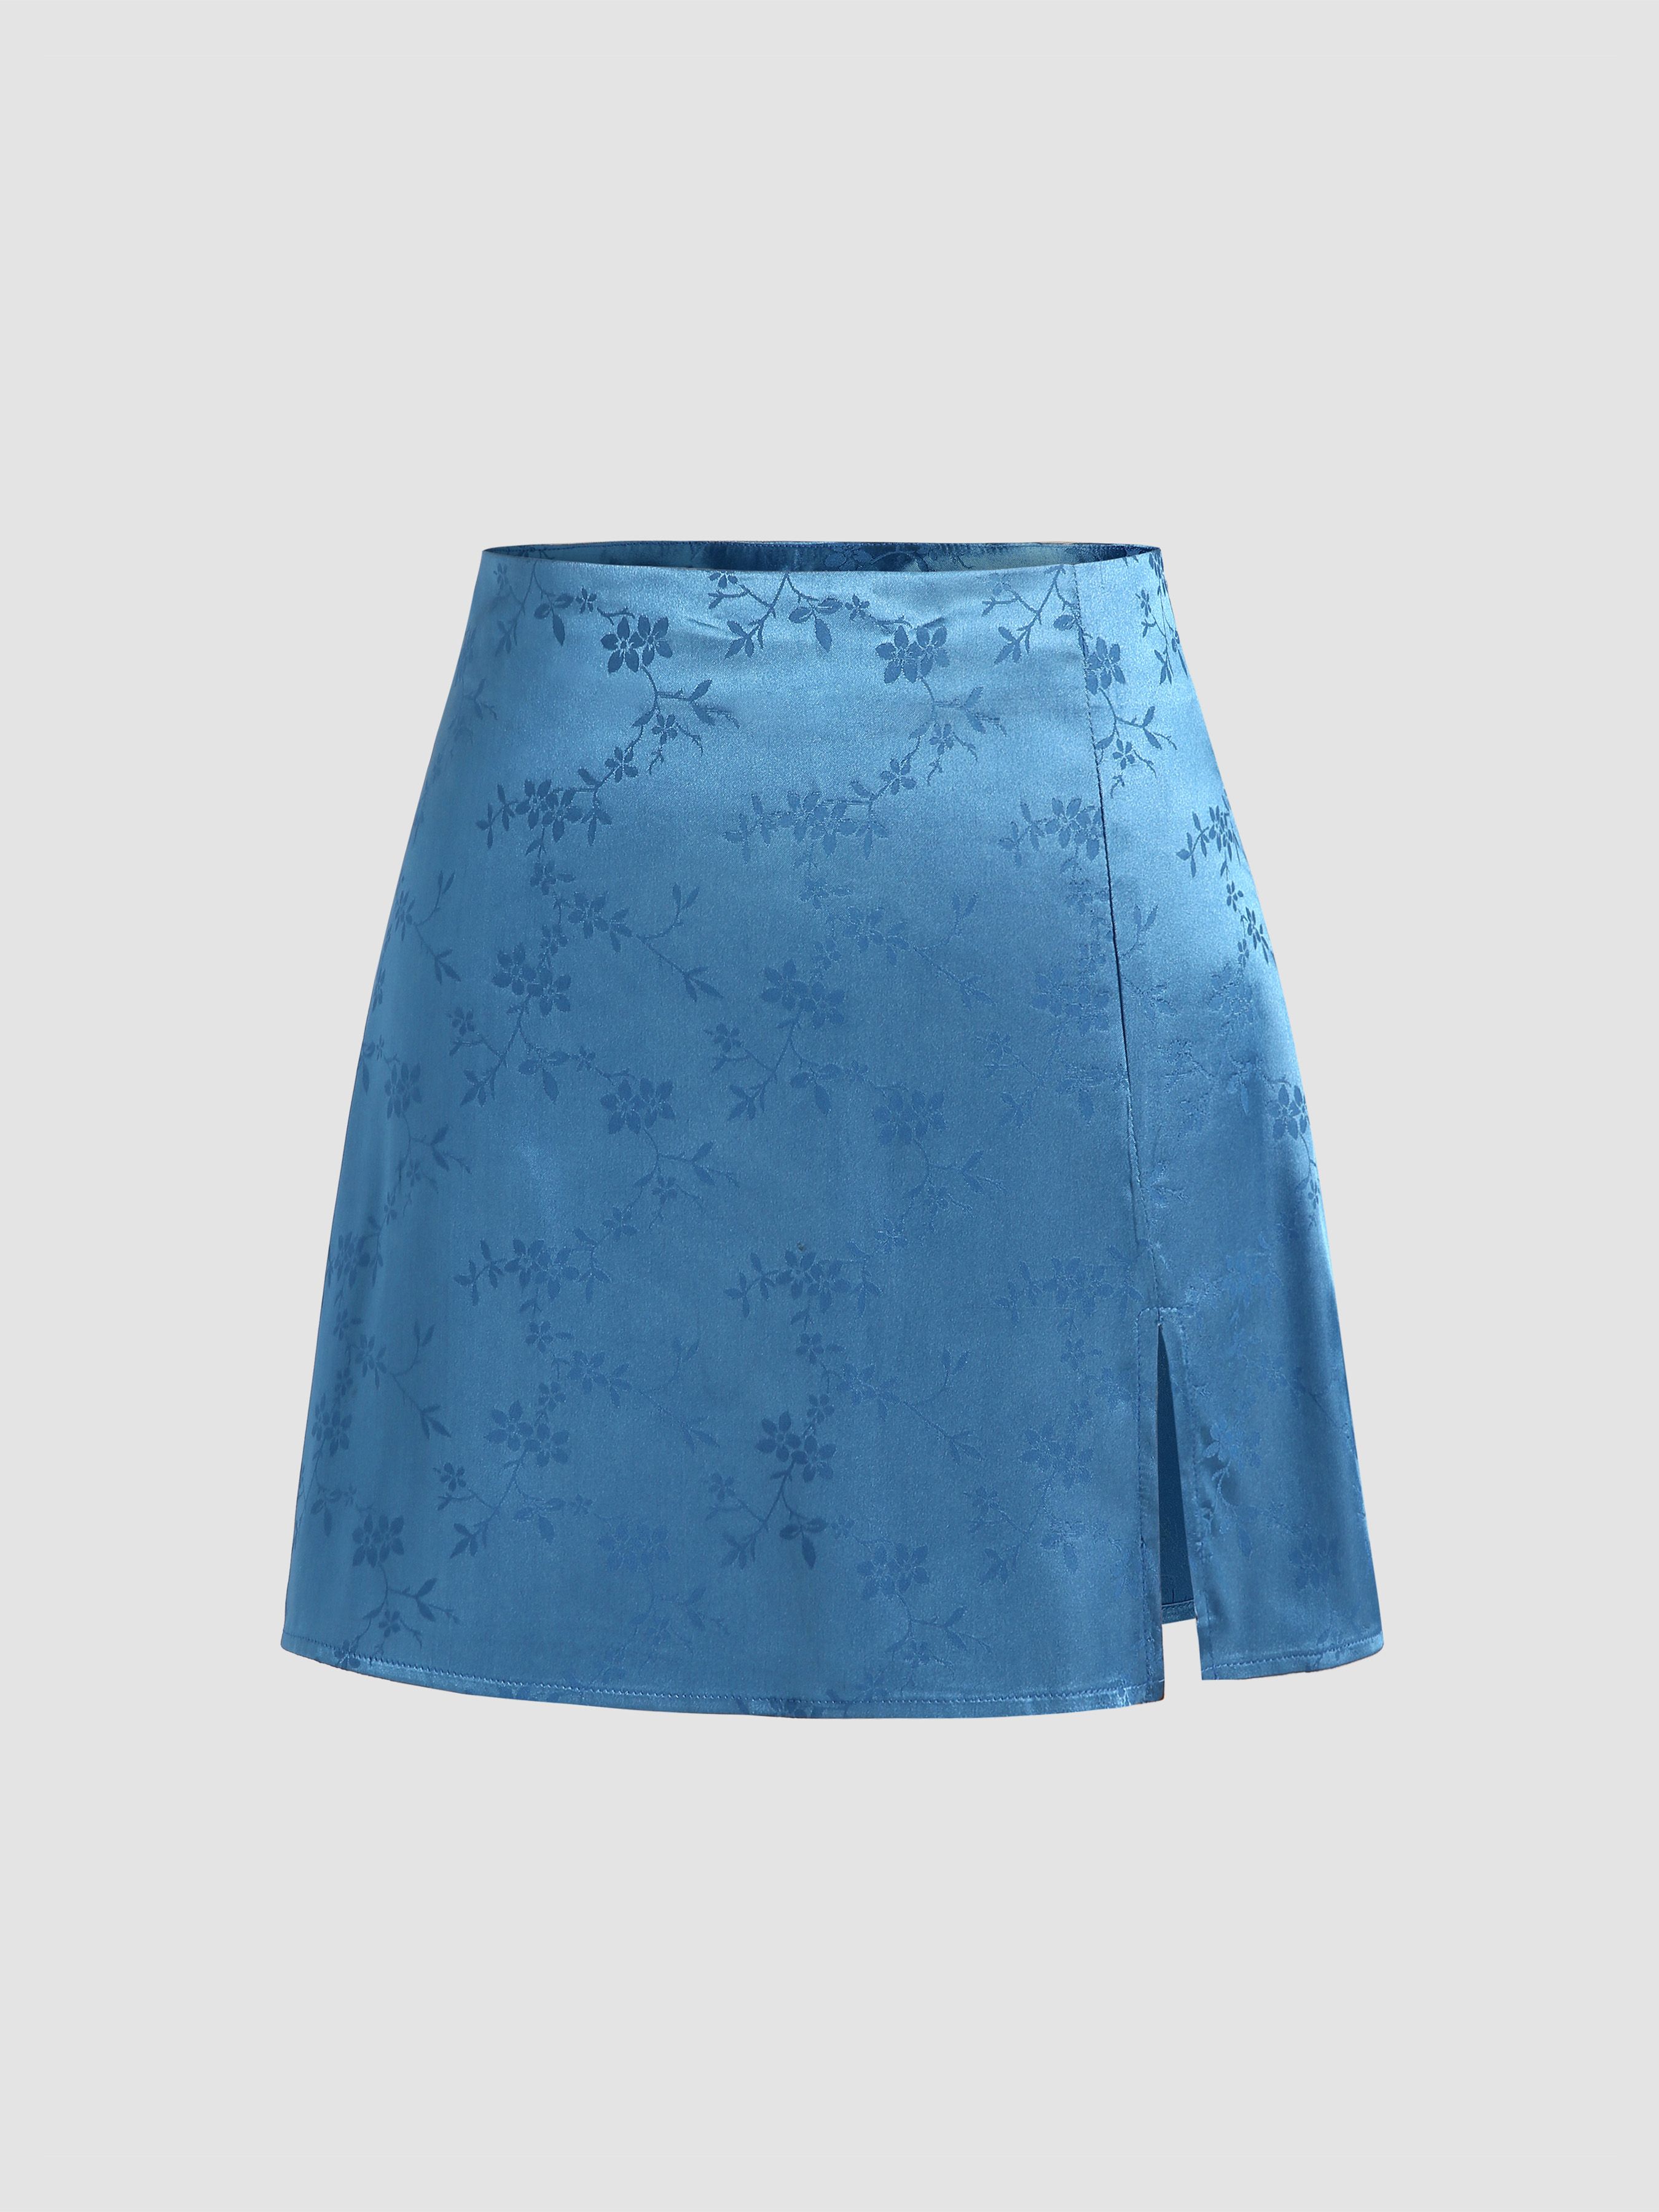 Shopping Bag Floral Jacquard Mini SkirtBlue/MUS$18.001You're US$31.00  away from FREE shipping Es... | Cider